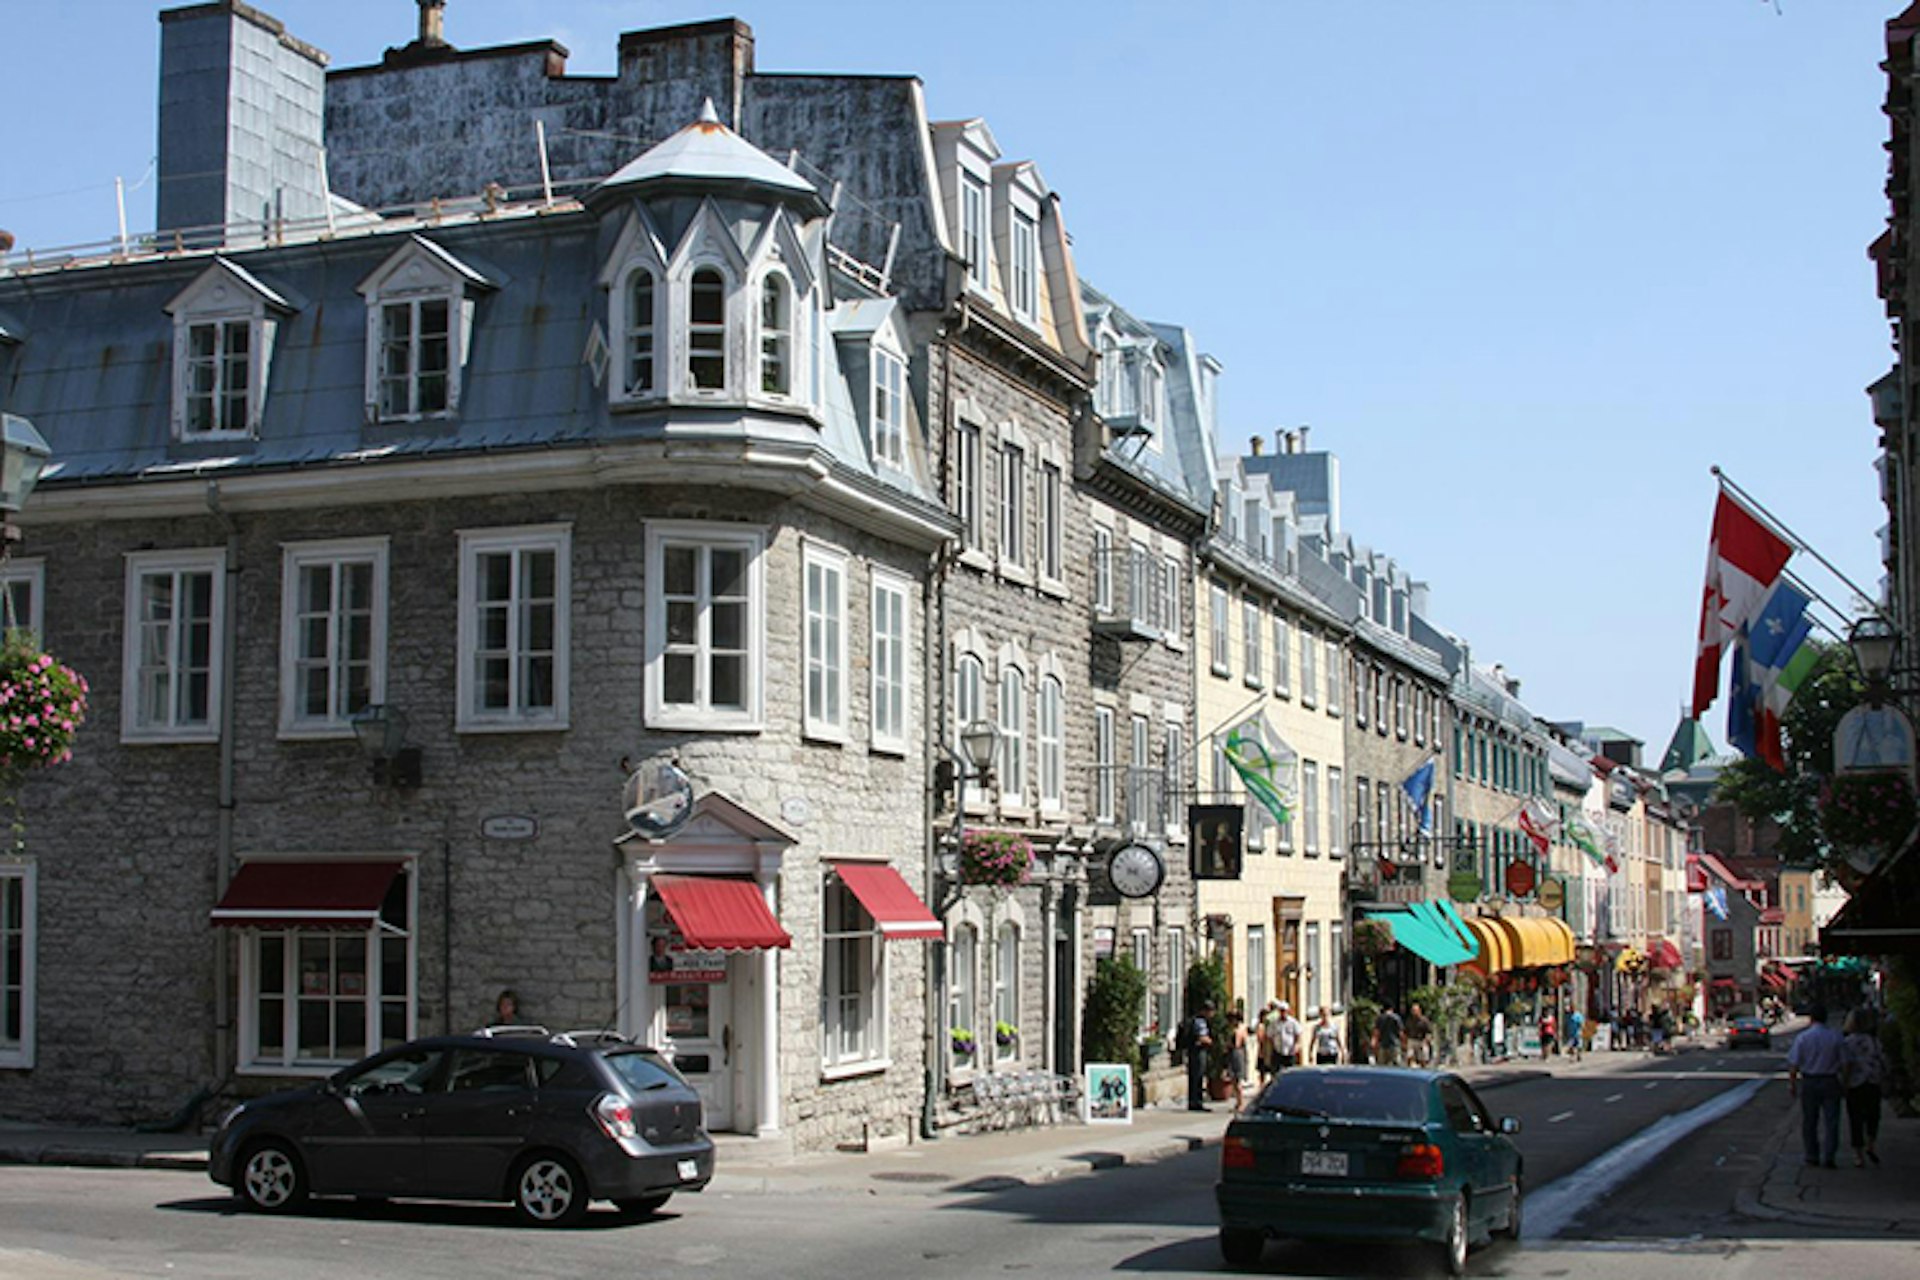 Québec City's streets bring an Old World feel to North America. Image by Derek Hatfield / CC BY 2.0